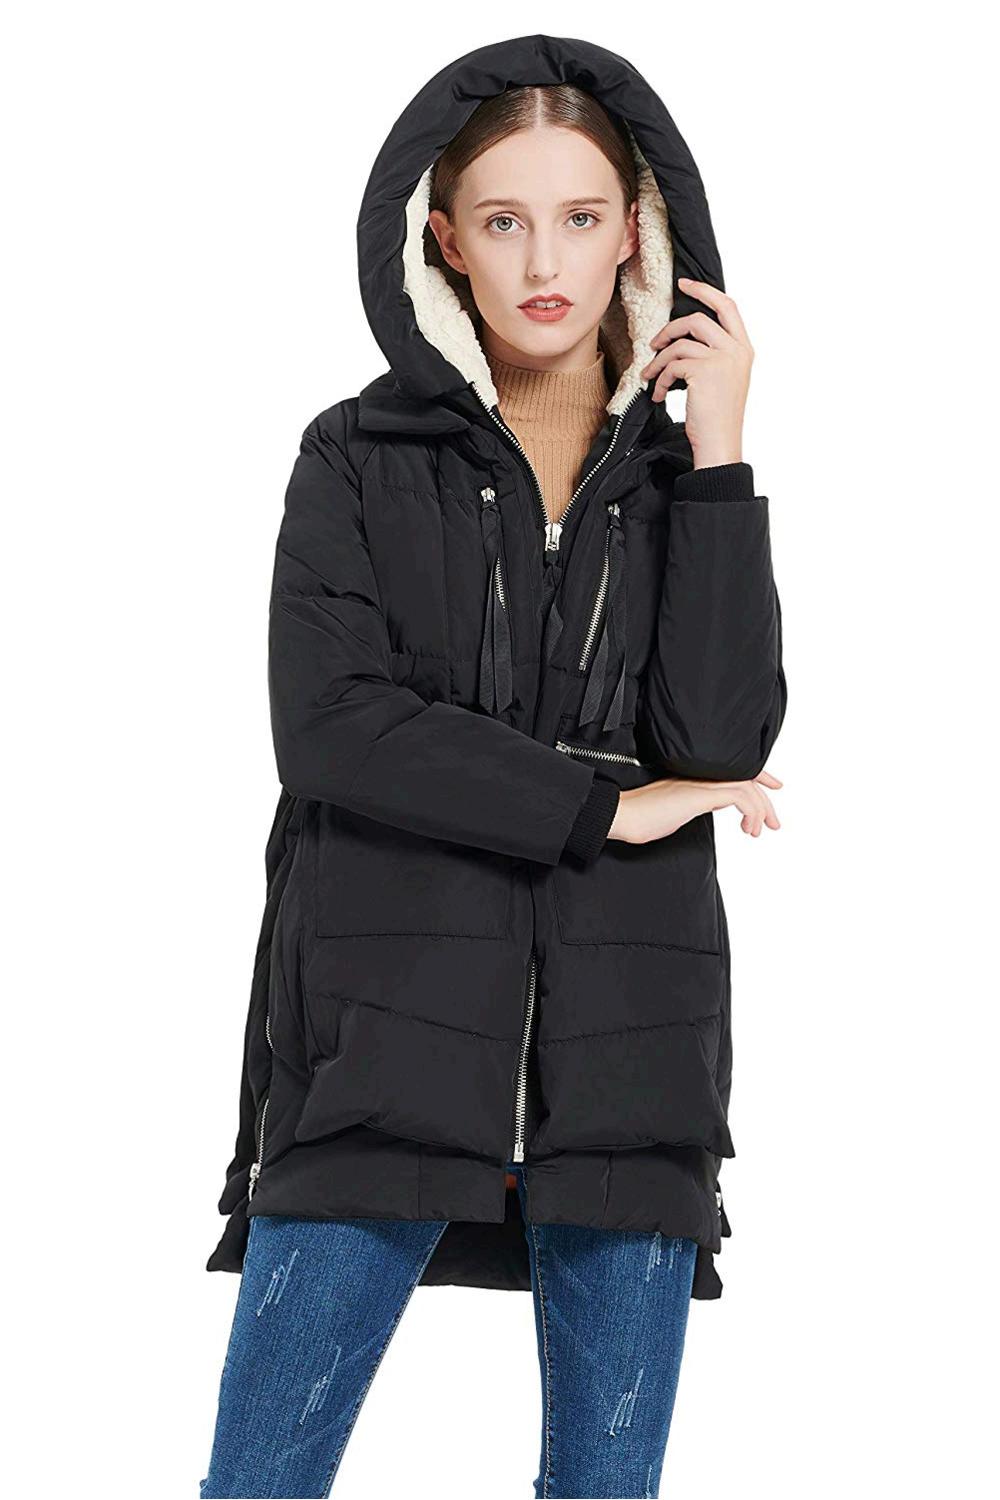 Orolay Women's Thickened Down Jacket Black 2XL, Black, Size XX-Large ...